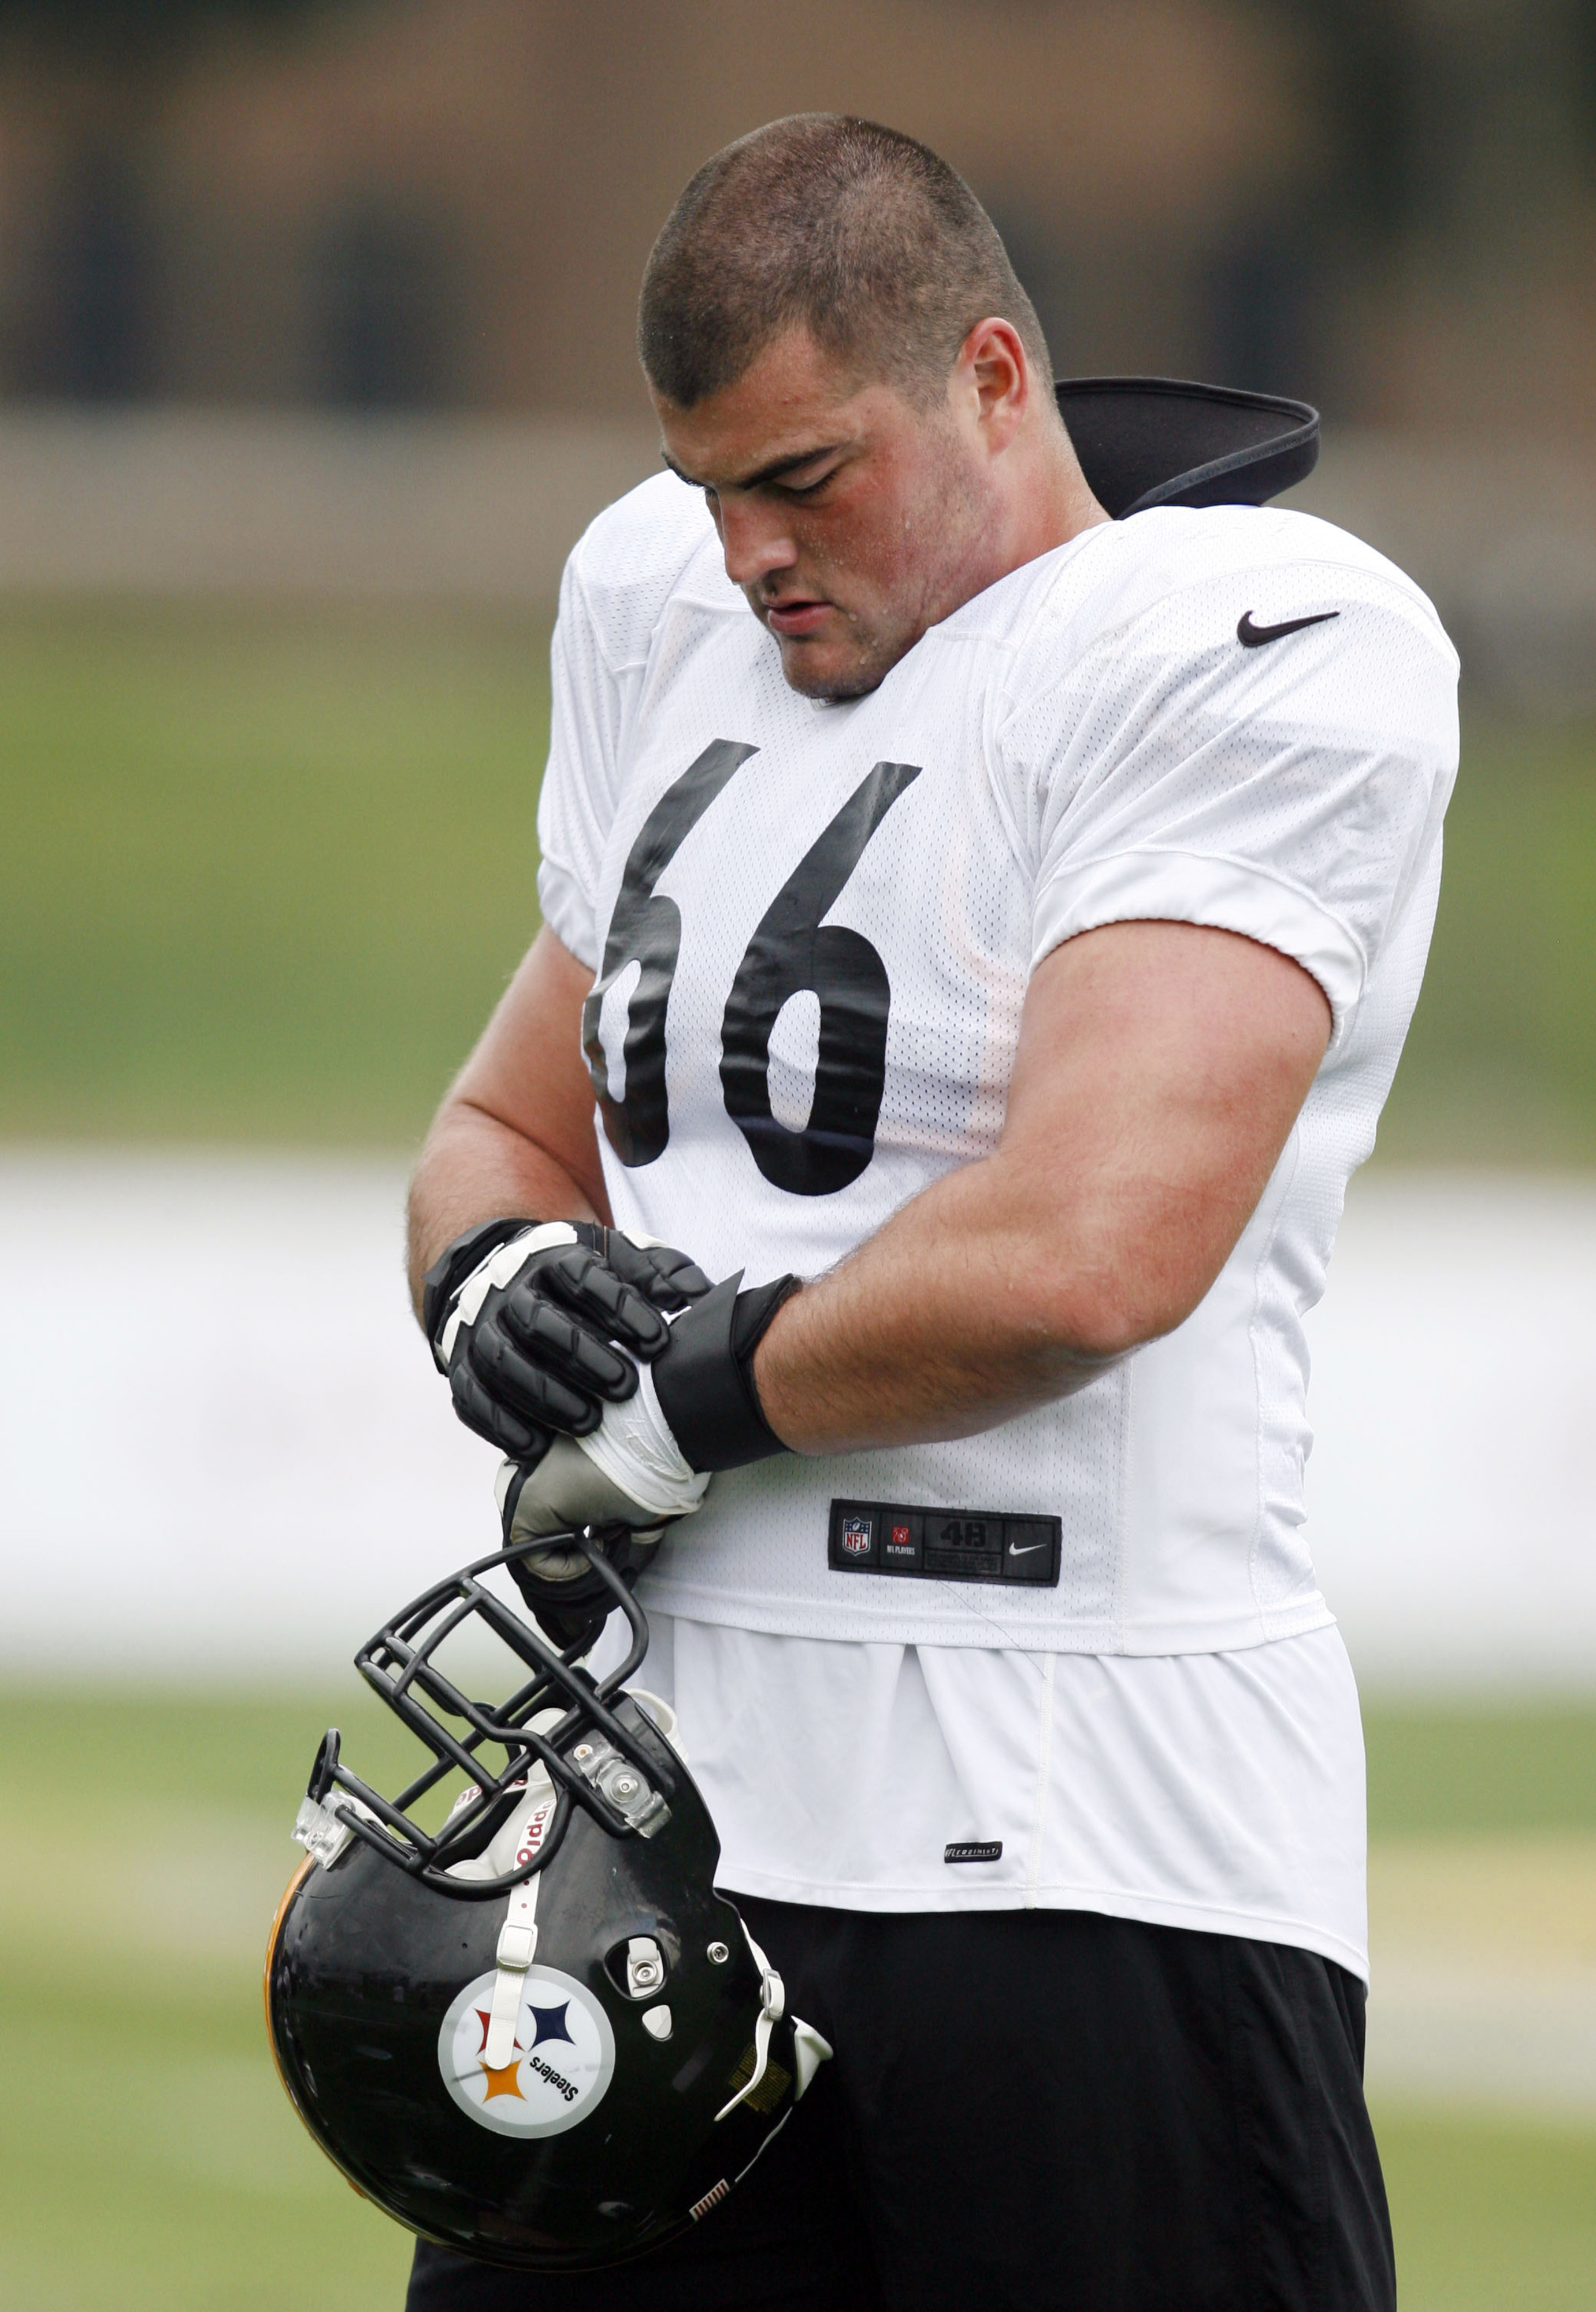 July 28, 2012; Pittsburgh, PA, USA; Pittsburgh Steelers offensive guard David DeCastro (66) on the field during training camp at Saint Vincent College. Mandatory Credit: Charles LeClaire-US PRESSWIRE